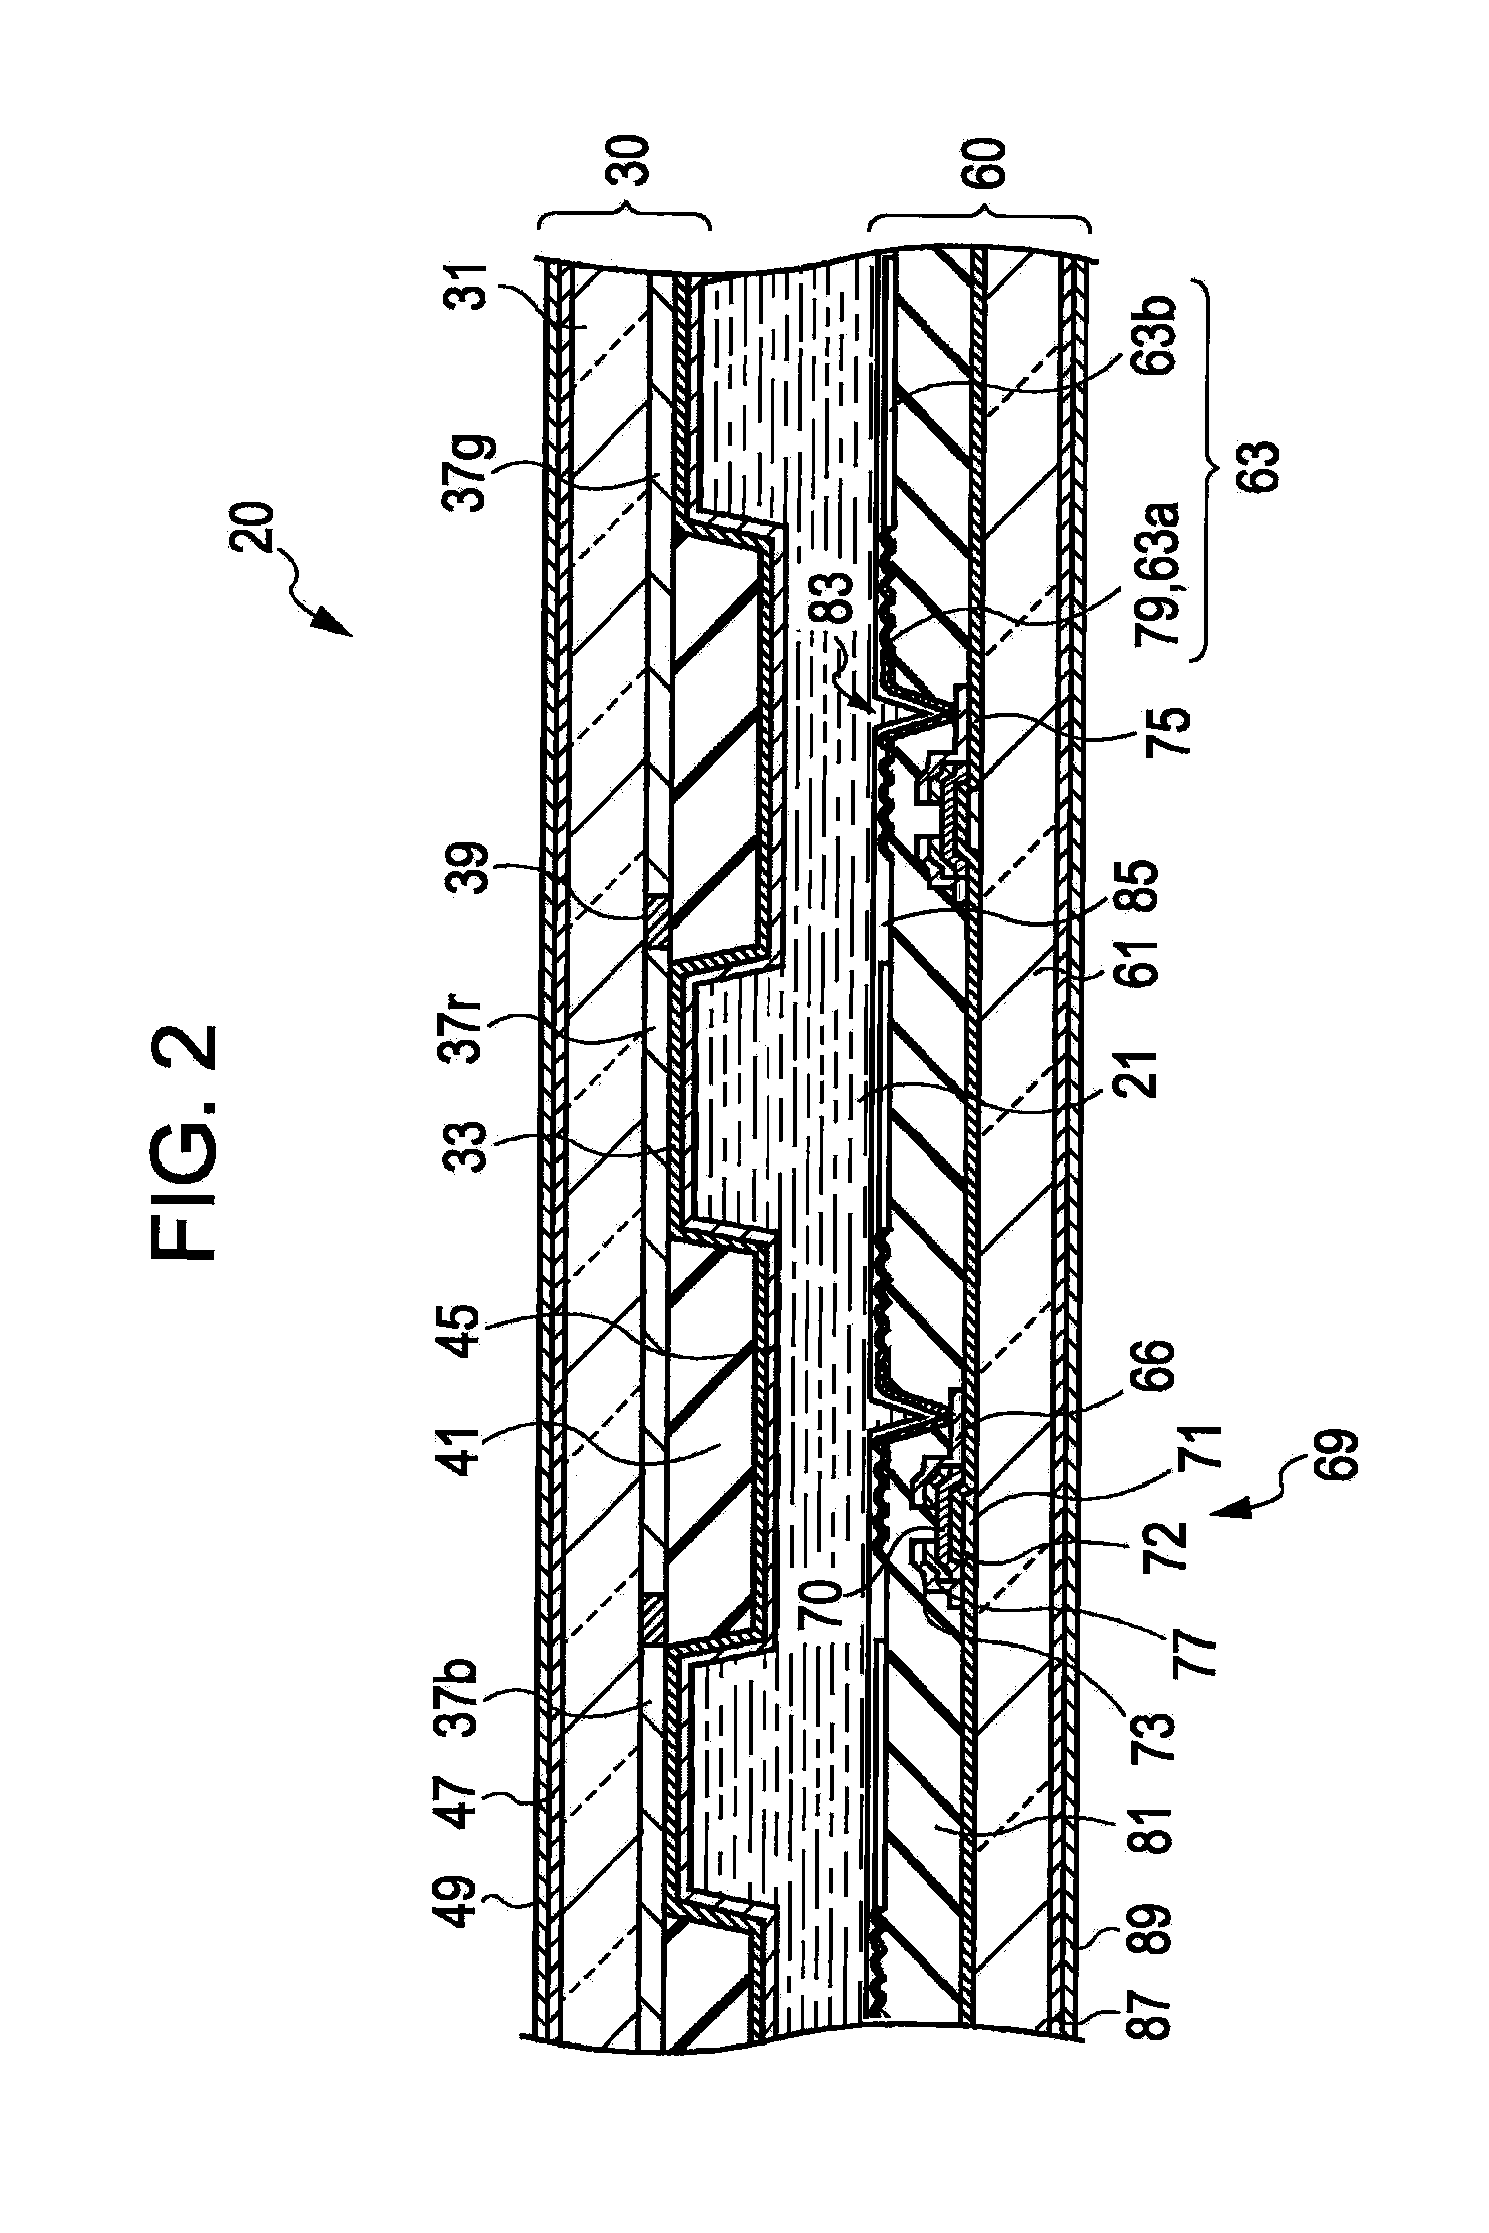 Electro-optical device, method for manufacturing electro-optical device, and electronic apparatus